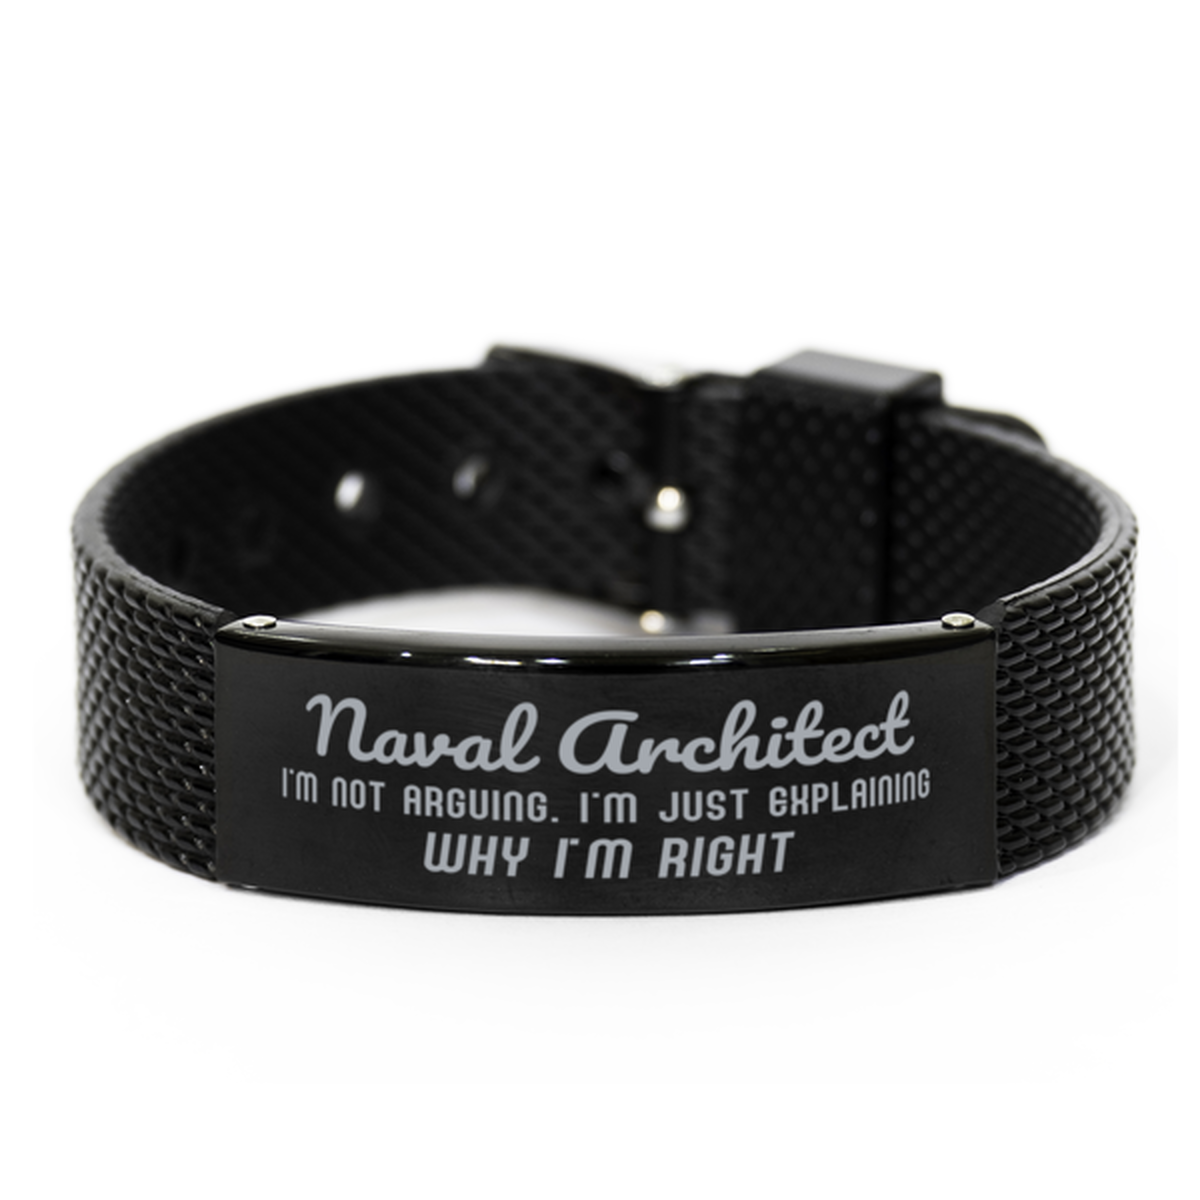 Naval Architect I'm not Arguing. I'm Just Explaining Why I'm RIGHT Black Shark Mesh Bracelet, Funny Saying Quote Naval Architect Gifts For Naval Architect Graduation Birthday Christmas Gifts for Men Women Coworker